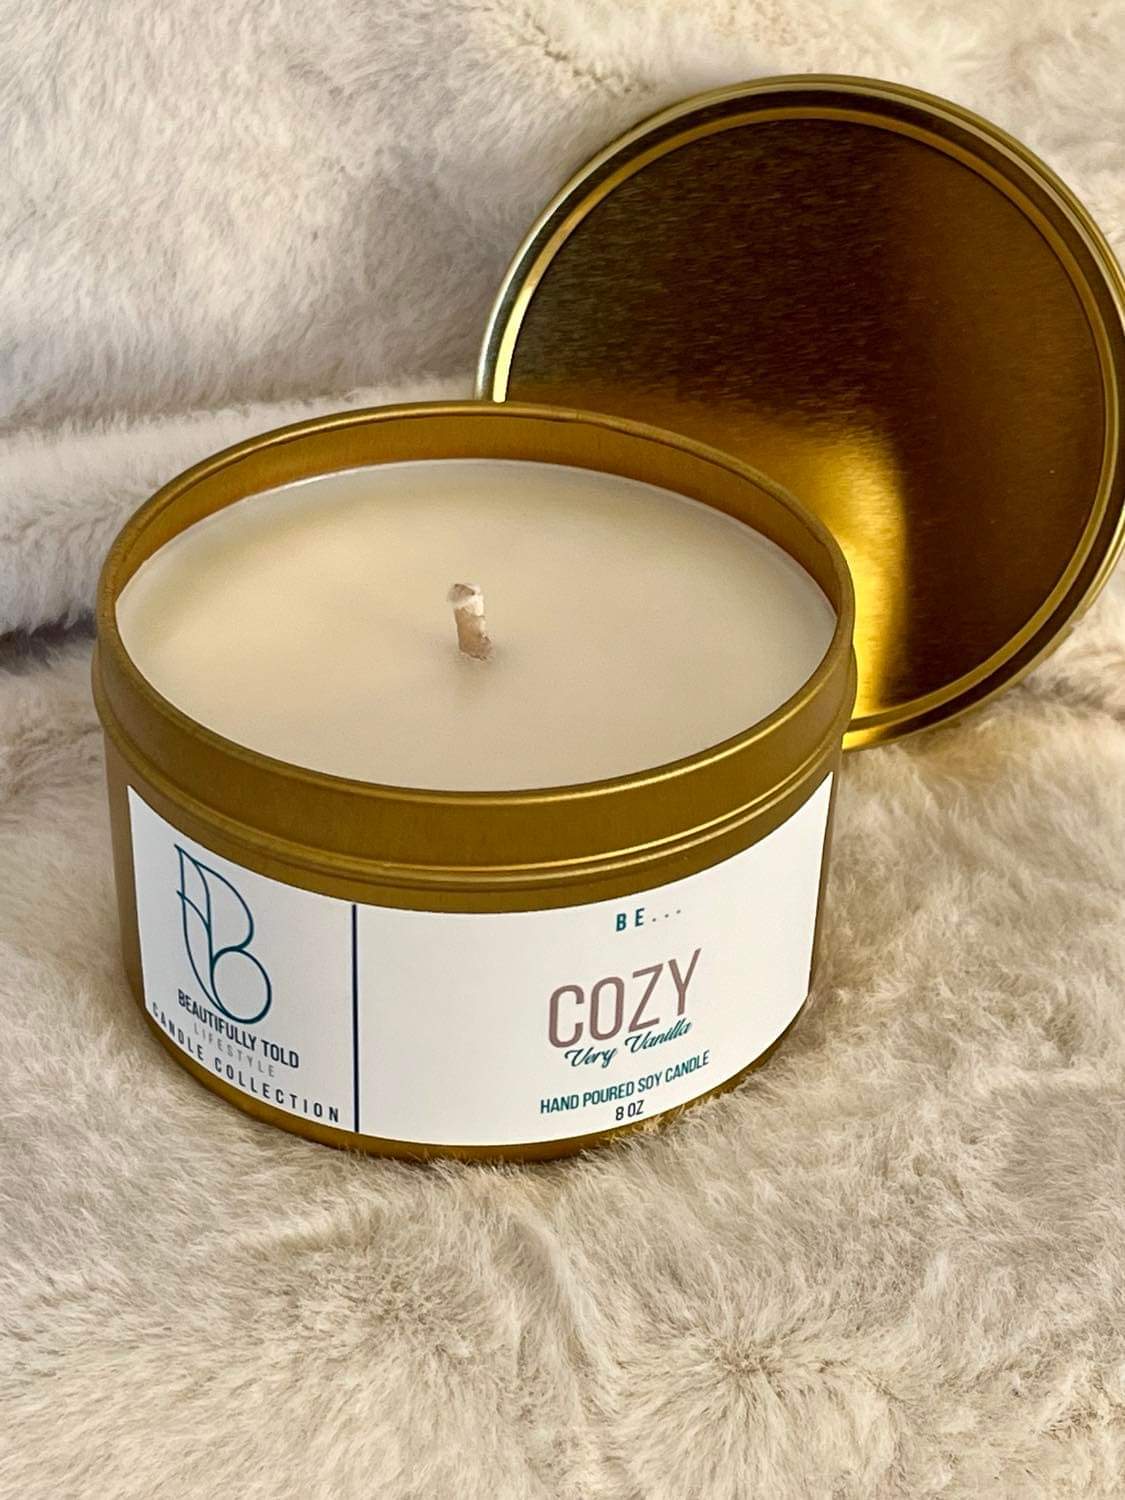 BE Cozy Candle